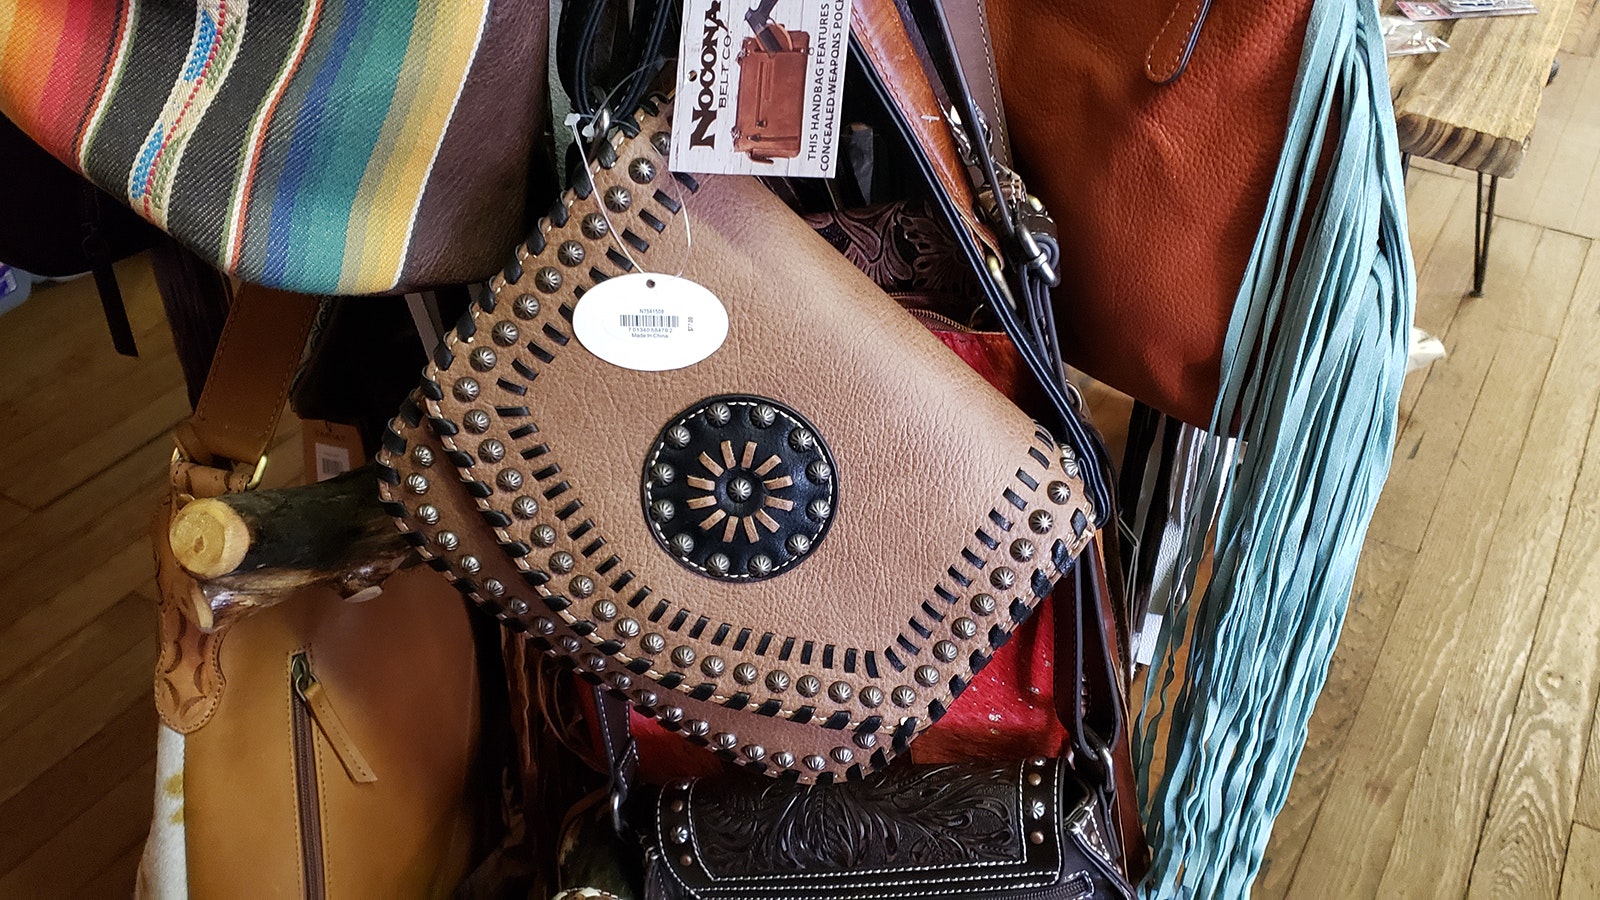 A conceal-carry purse made of leather.